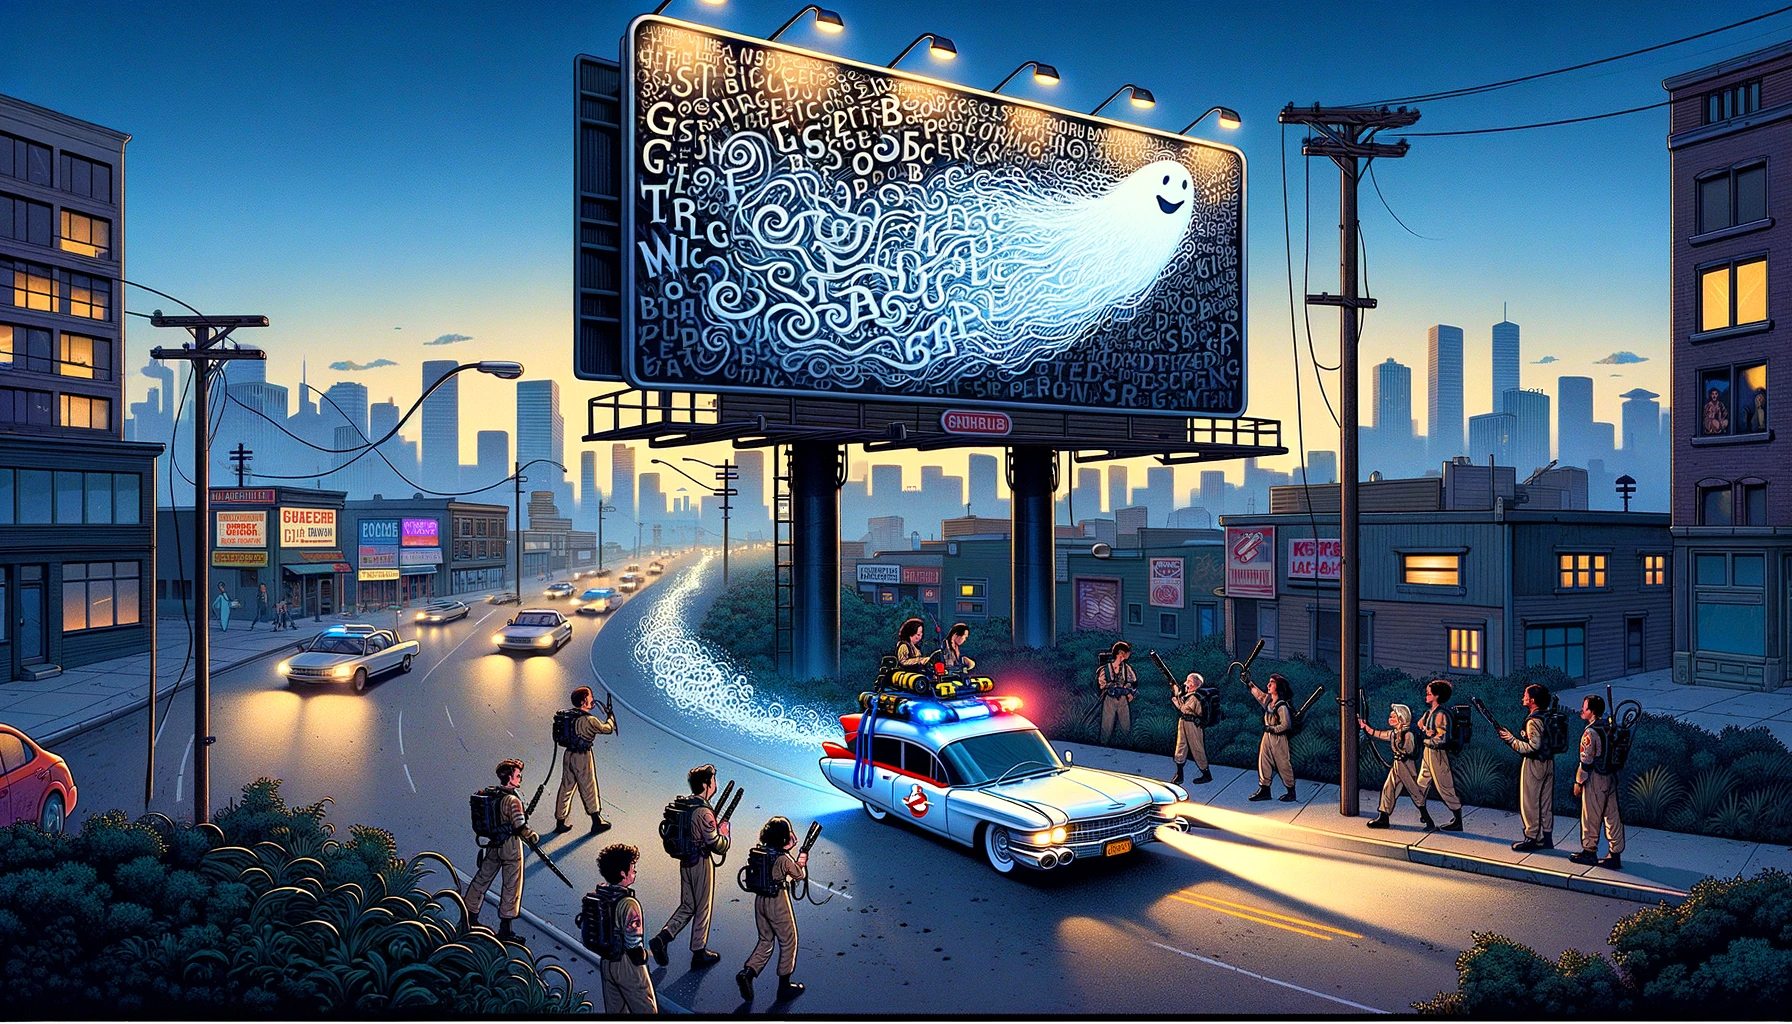 A-landscape-illustration-capturing-a-ghost-haunting-a-billboard-in-an-urban-setting.-The-ghost-made-of-swirling-letters-and-words-appears-to-be-alte.